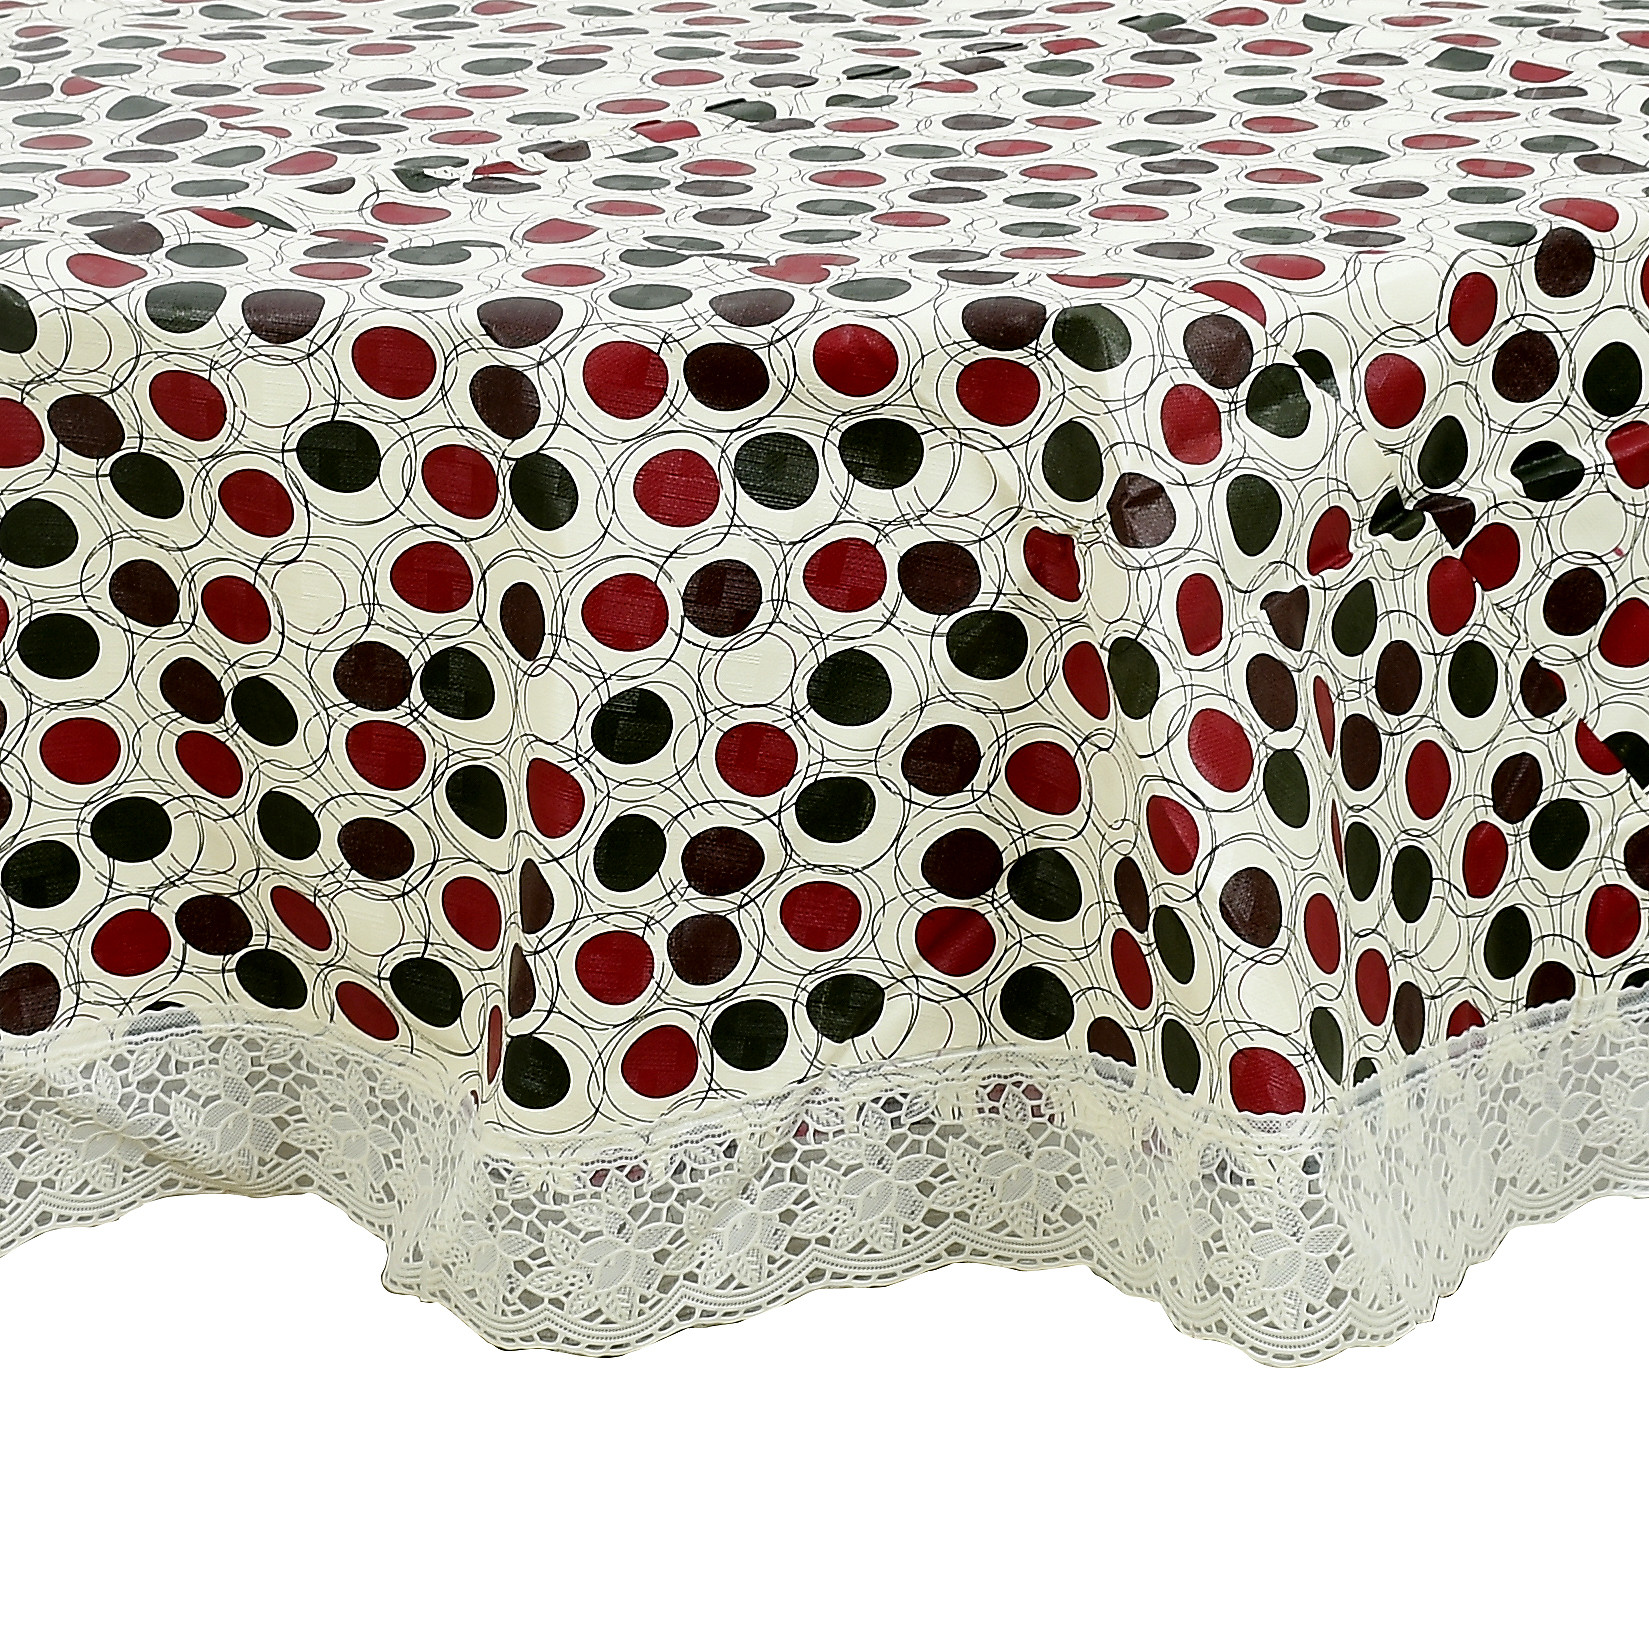 Kuber Industries Polka Dots Print Round Table Cover 60 Inch-Waterproof PVC Resistant Spillproof PVC Fabric Table Cover for Dining Room Kitchen Party (Brown)-KUBMRT11815